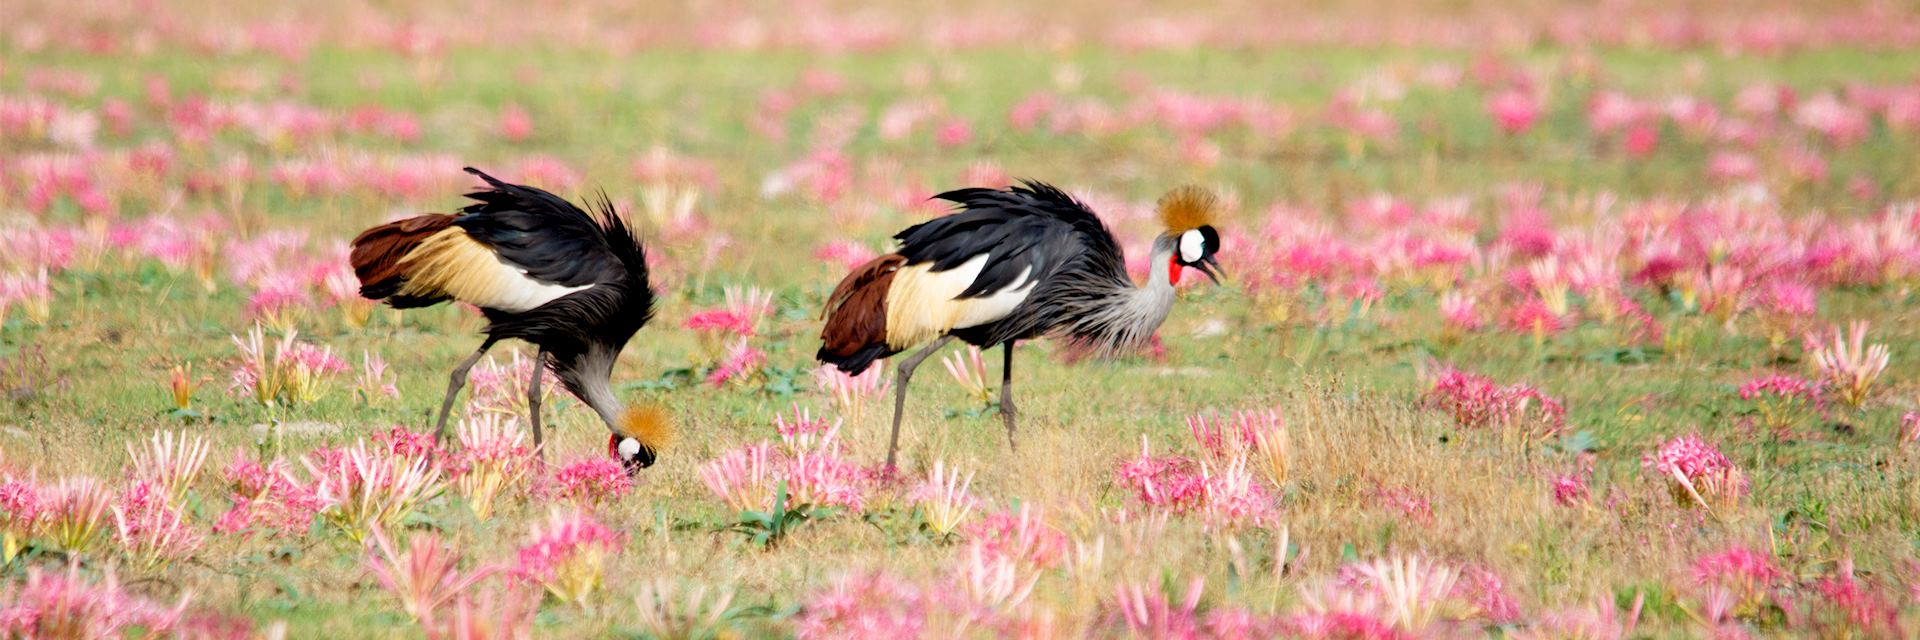 Crowned cranes in South Luangwa National Park